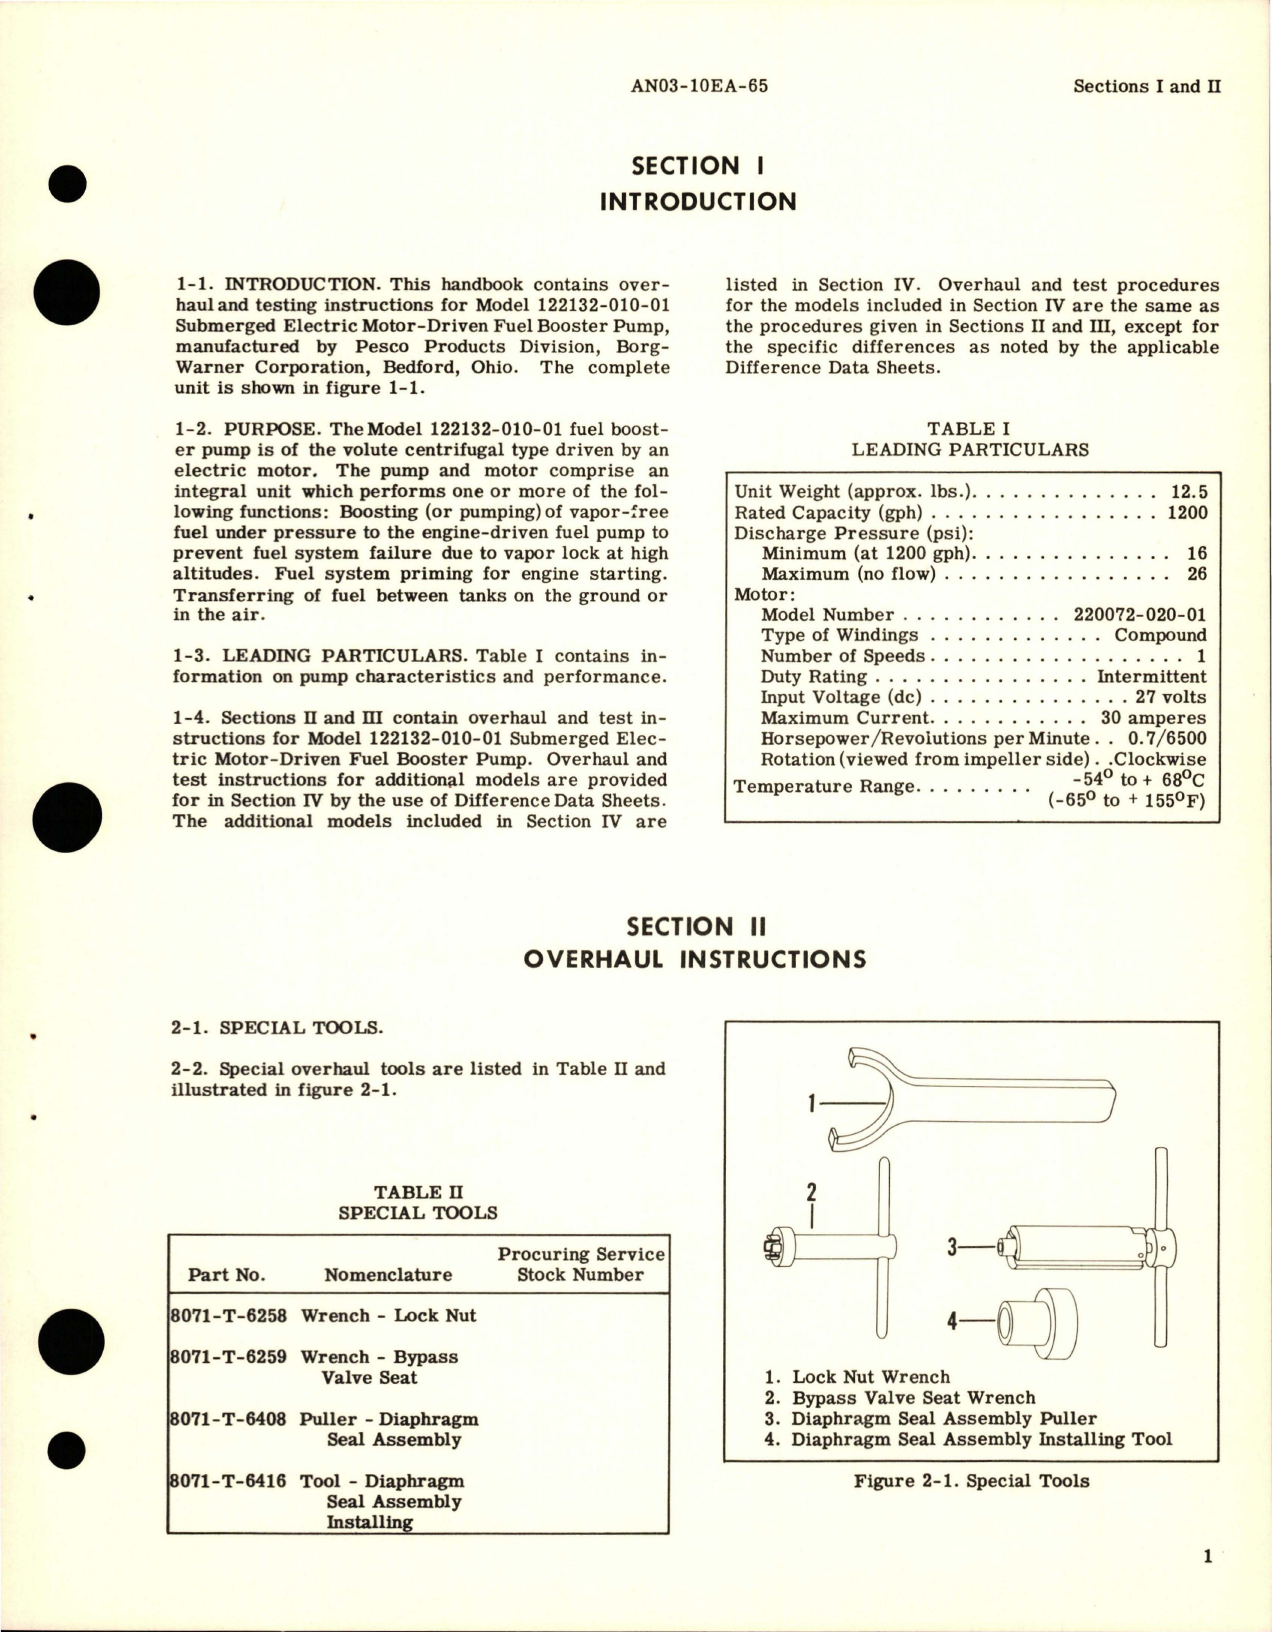 Sample page 5 from AirCorps Library document: Overhaul Instructions for Fuel Booster Pumps - Models 122132-010-01 and 122132-020-01